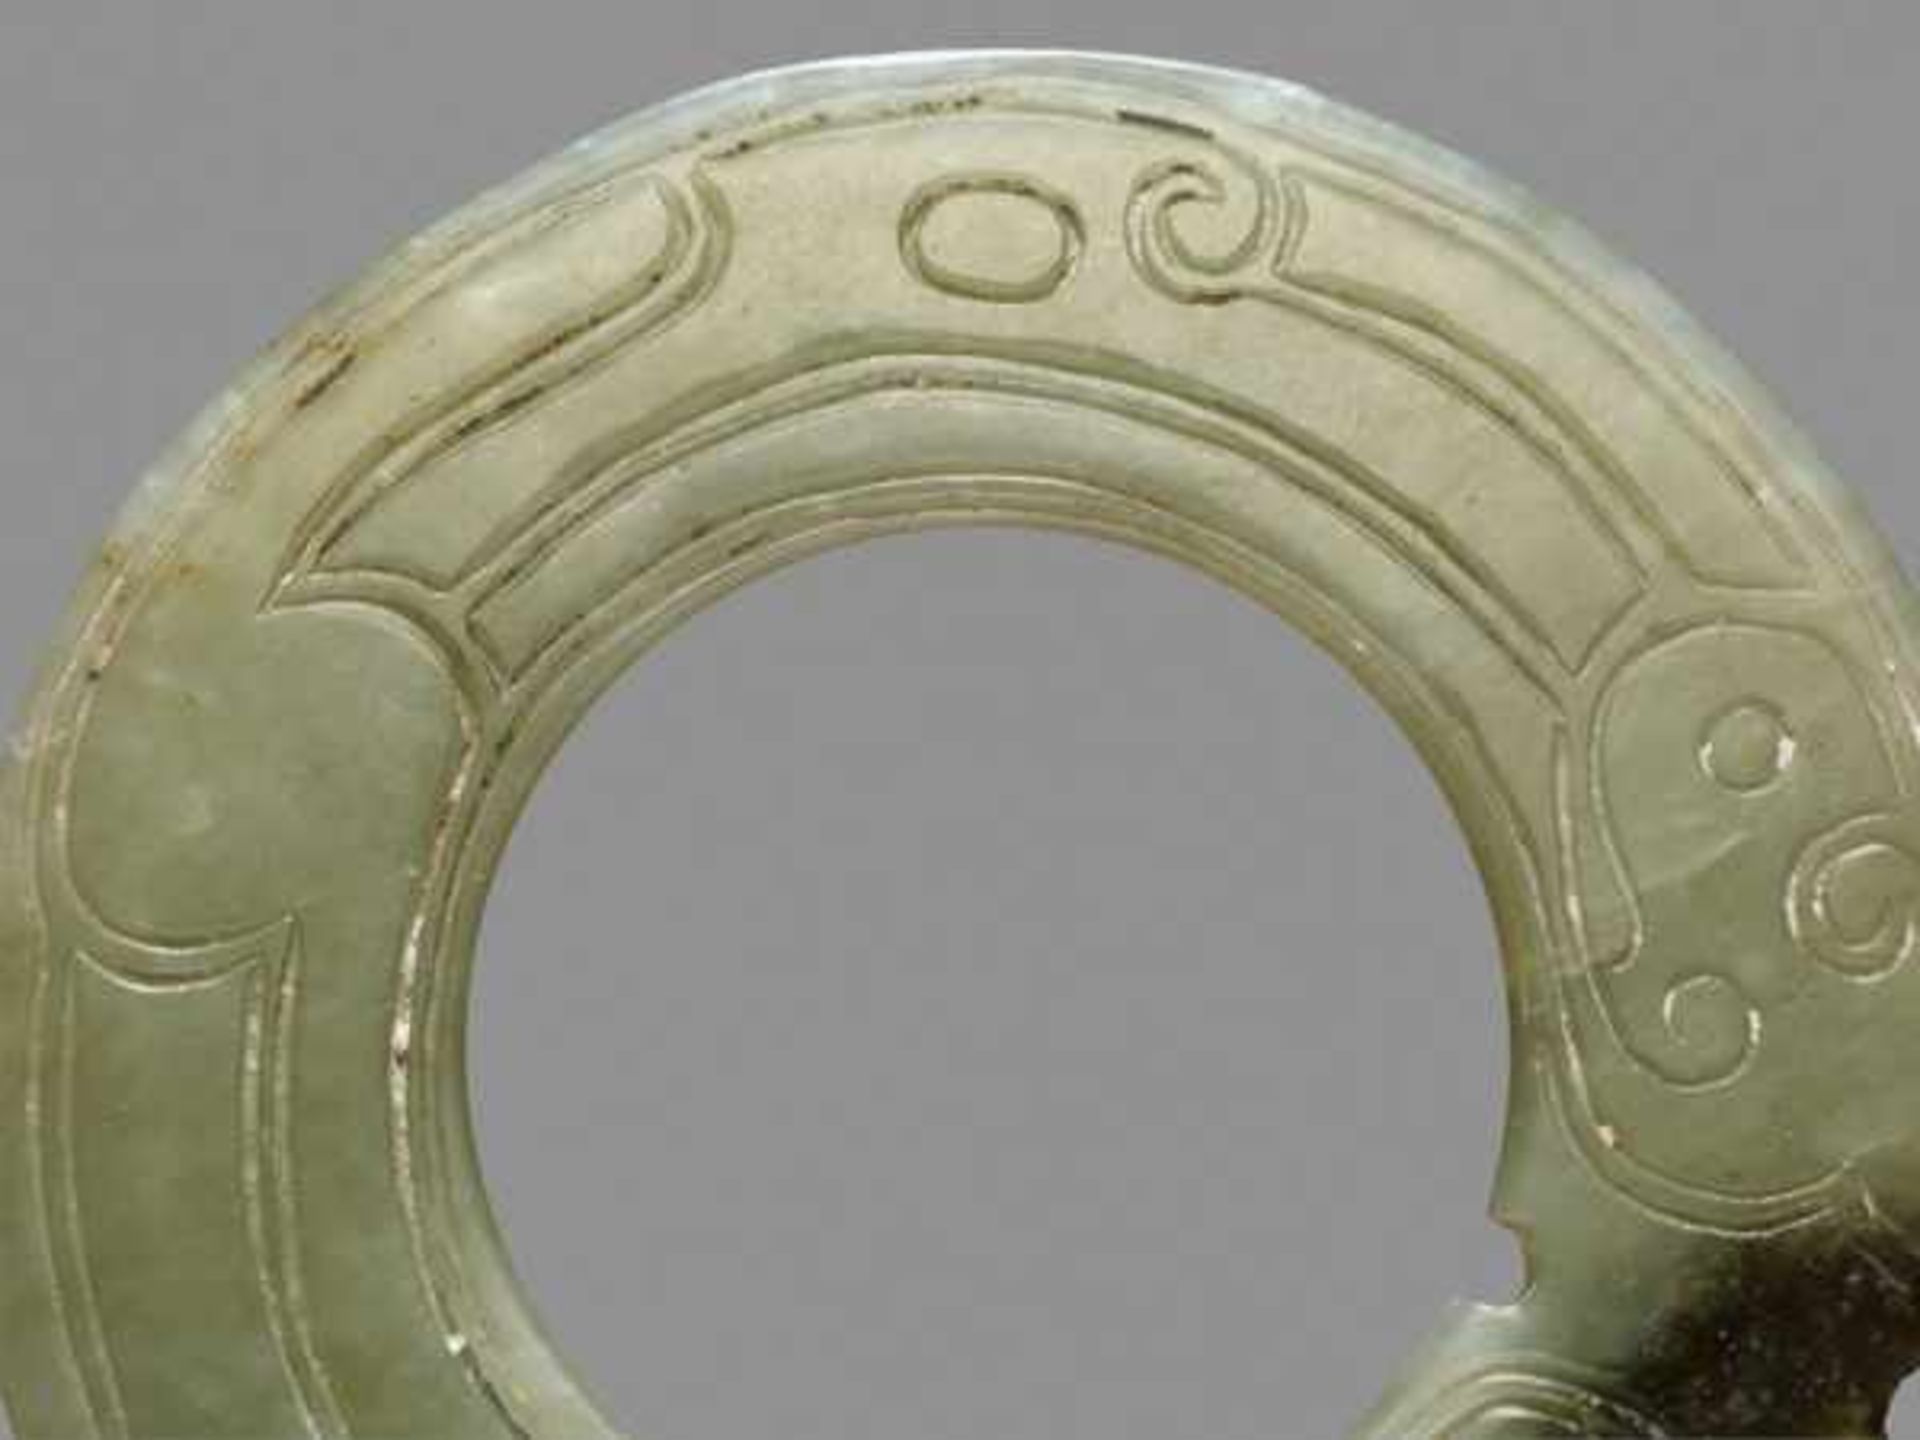 THIN AND DELICATE GREEN JADE RING WITH AN INCISED PATTERN OF STYLIZED DRAGONS Jade, China. Late - Image 3 of 6